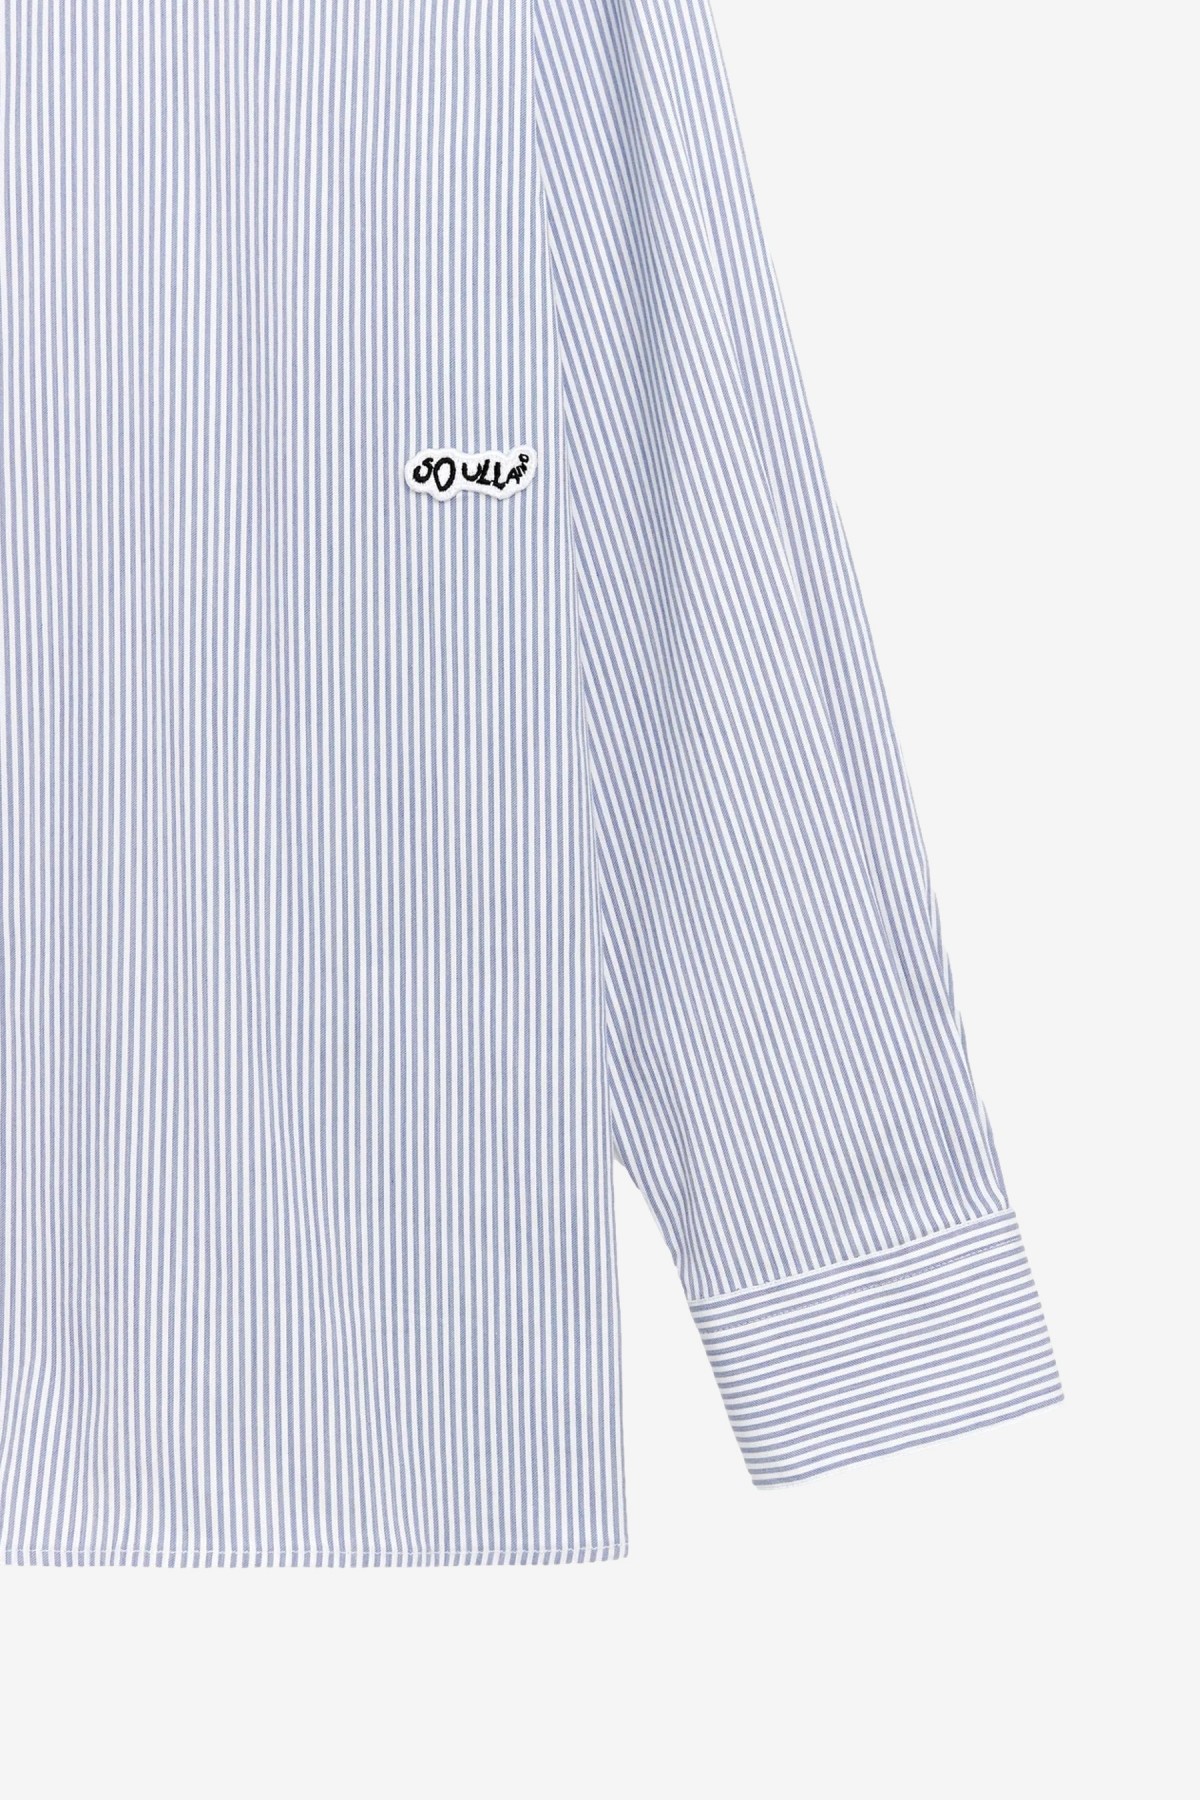 Soulland Perry Shirt in White/Blue Stripes